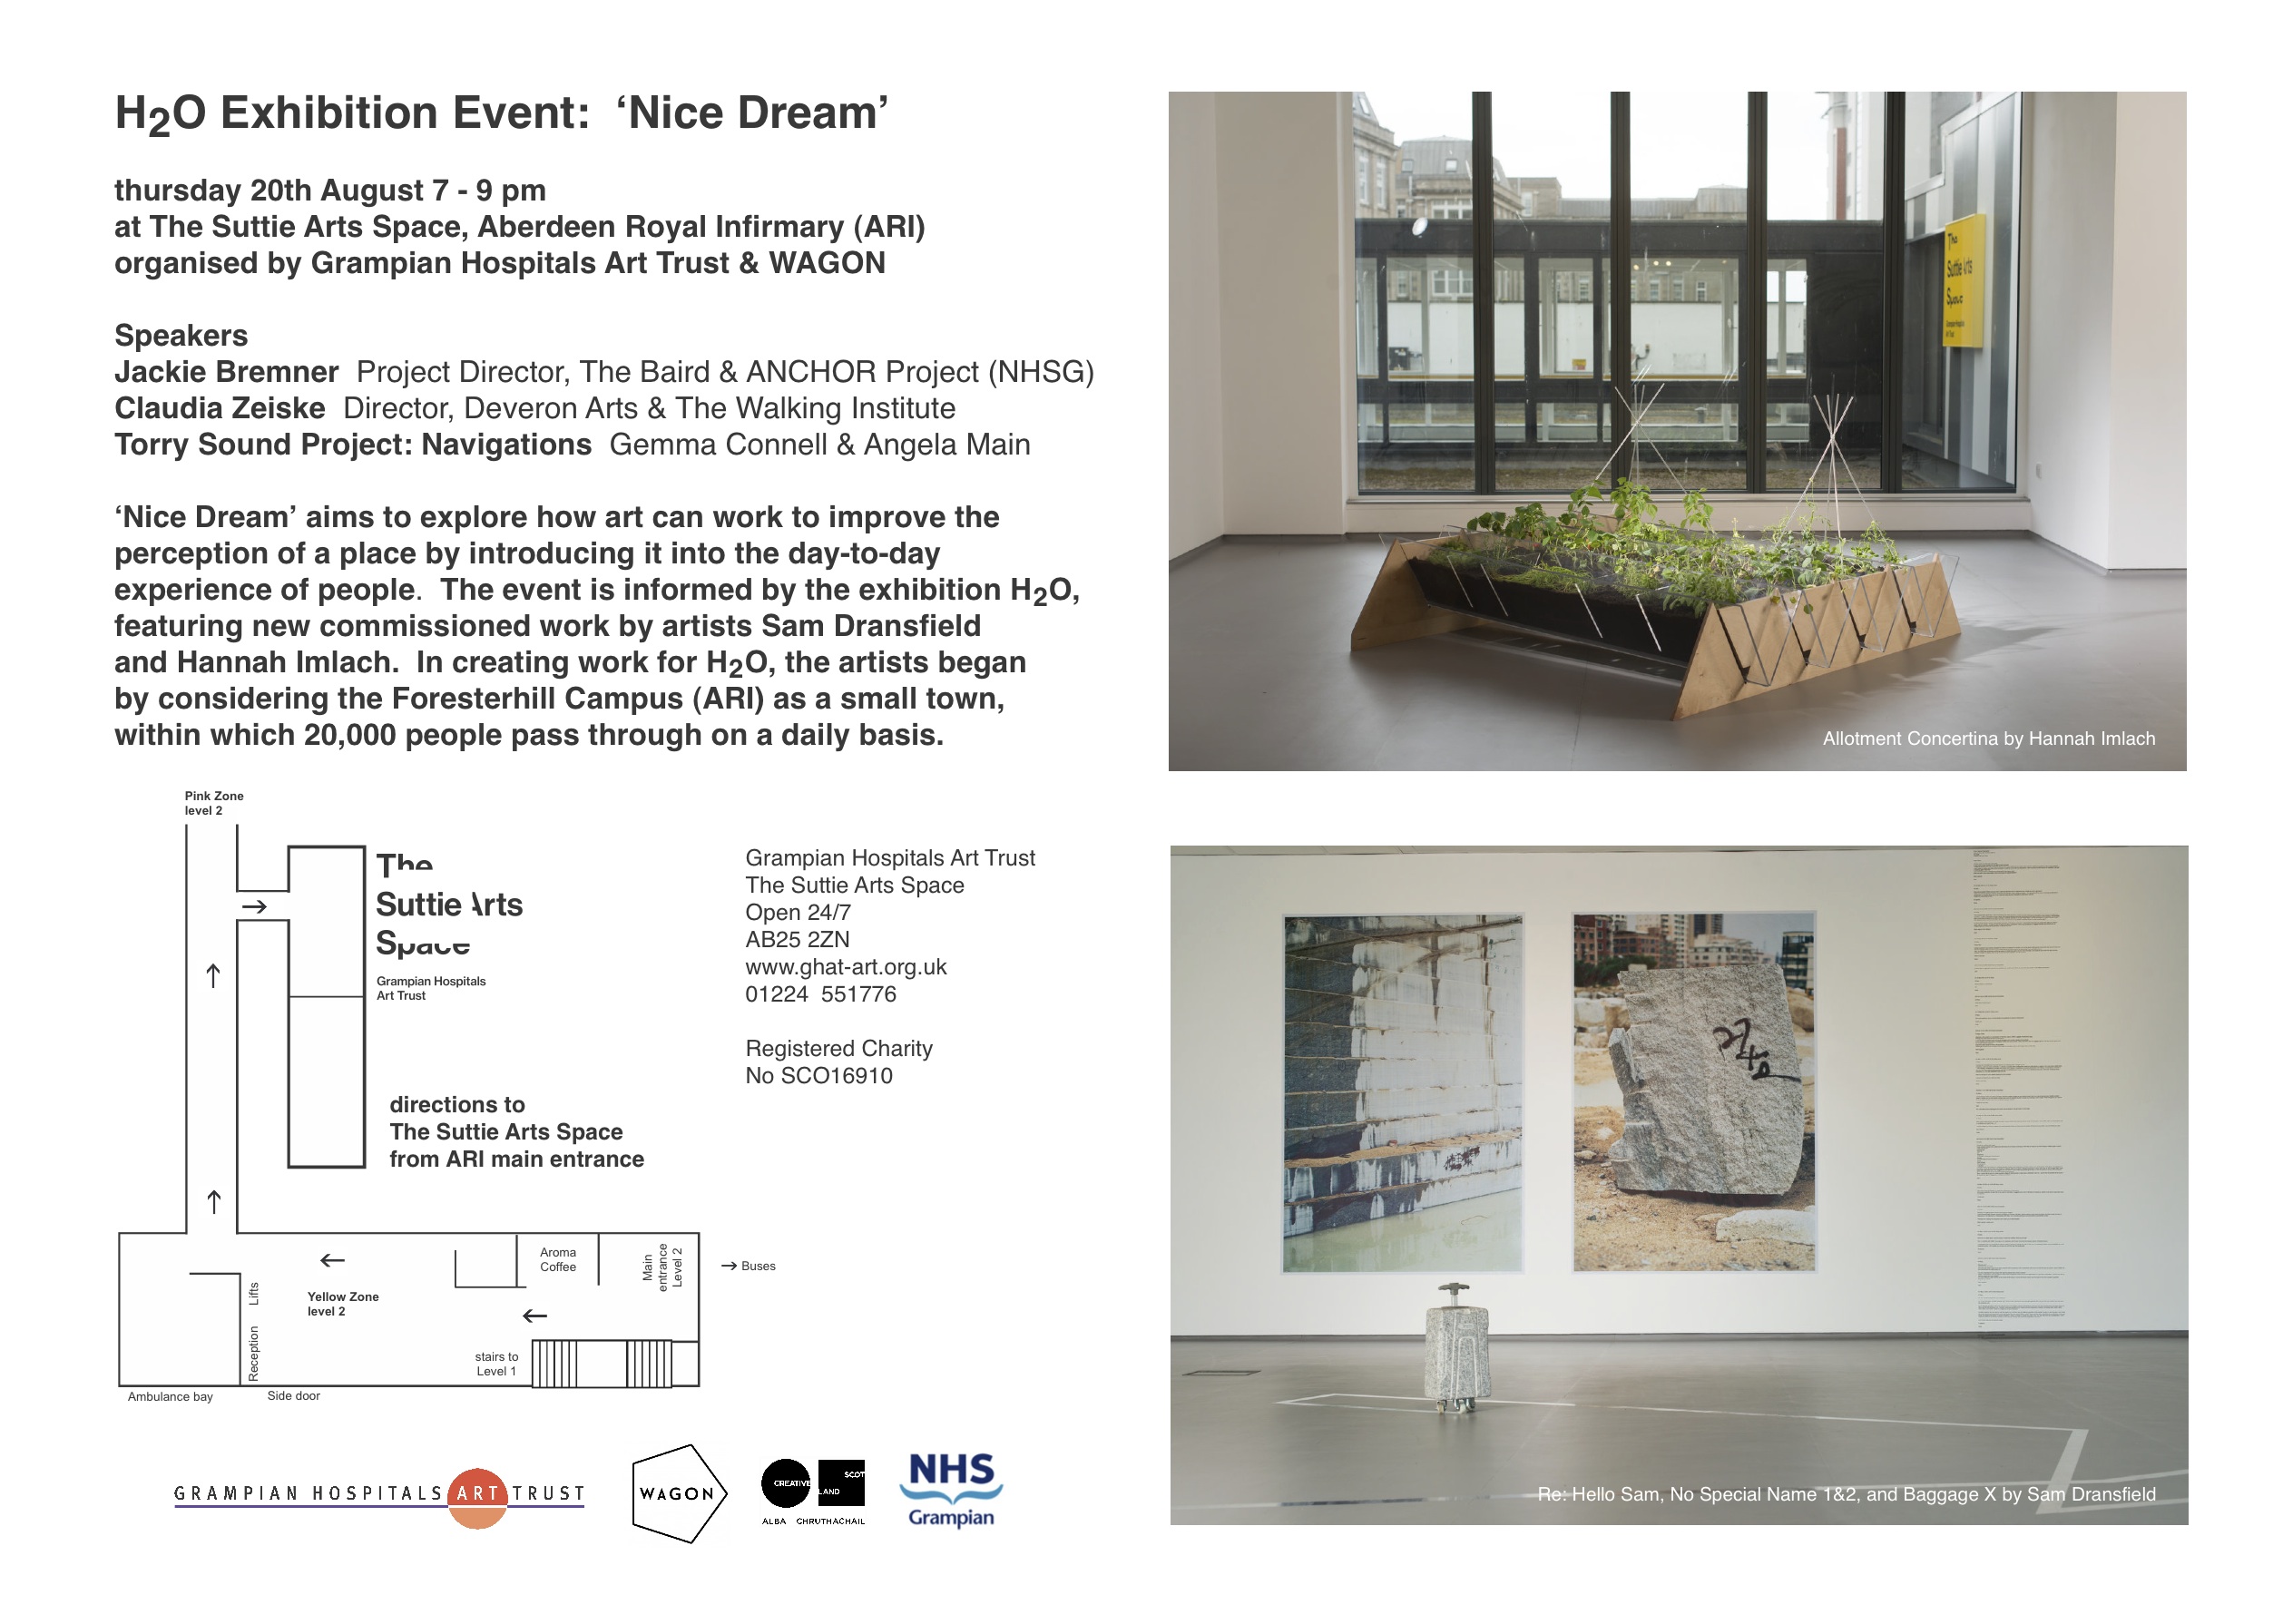 H2O_Exhibition_Event_Nice_Dream_Flyer